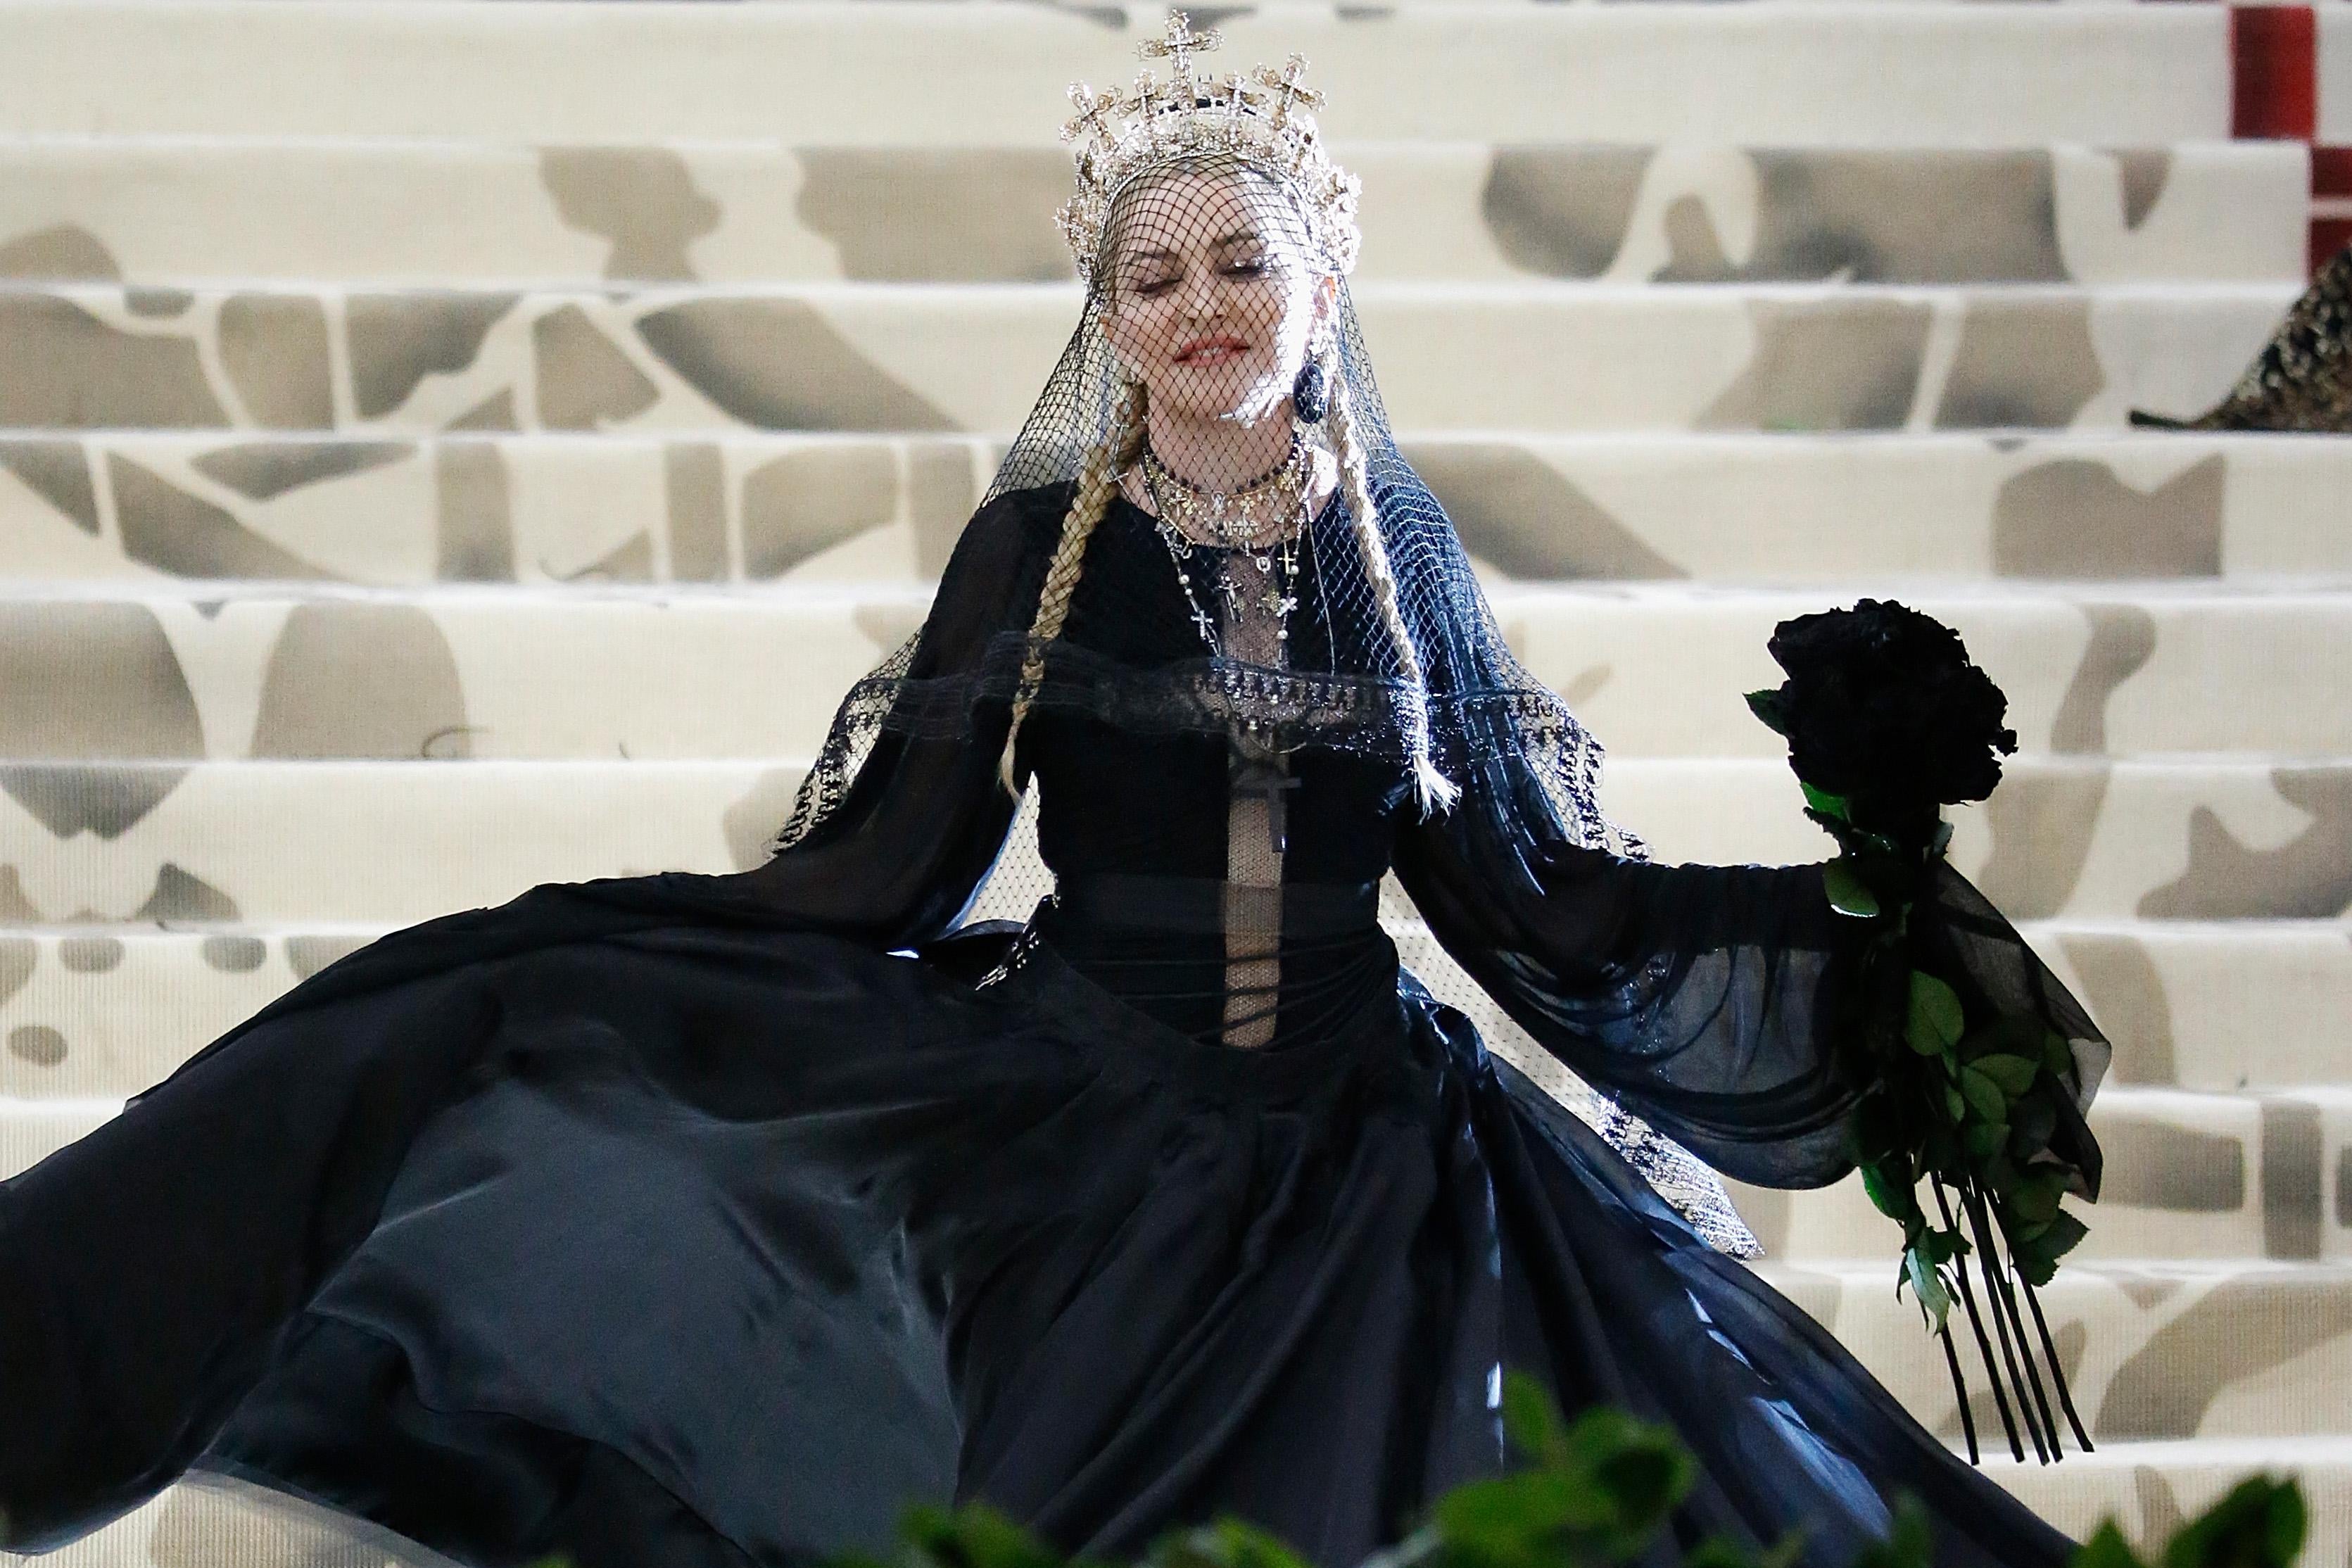 Madonna stands on the steps of the Met wearing a poofy black dress with multiple rosaries. She wears a crown made of crosses.